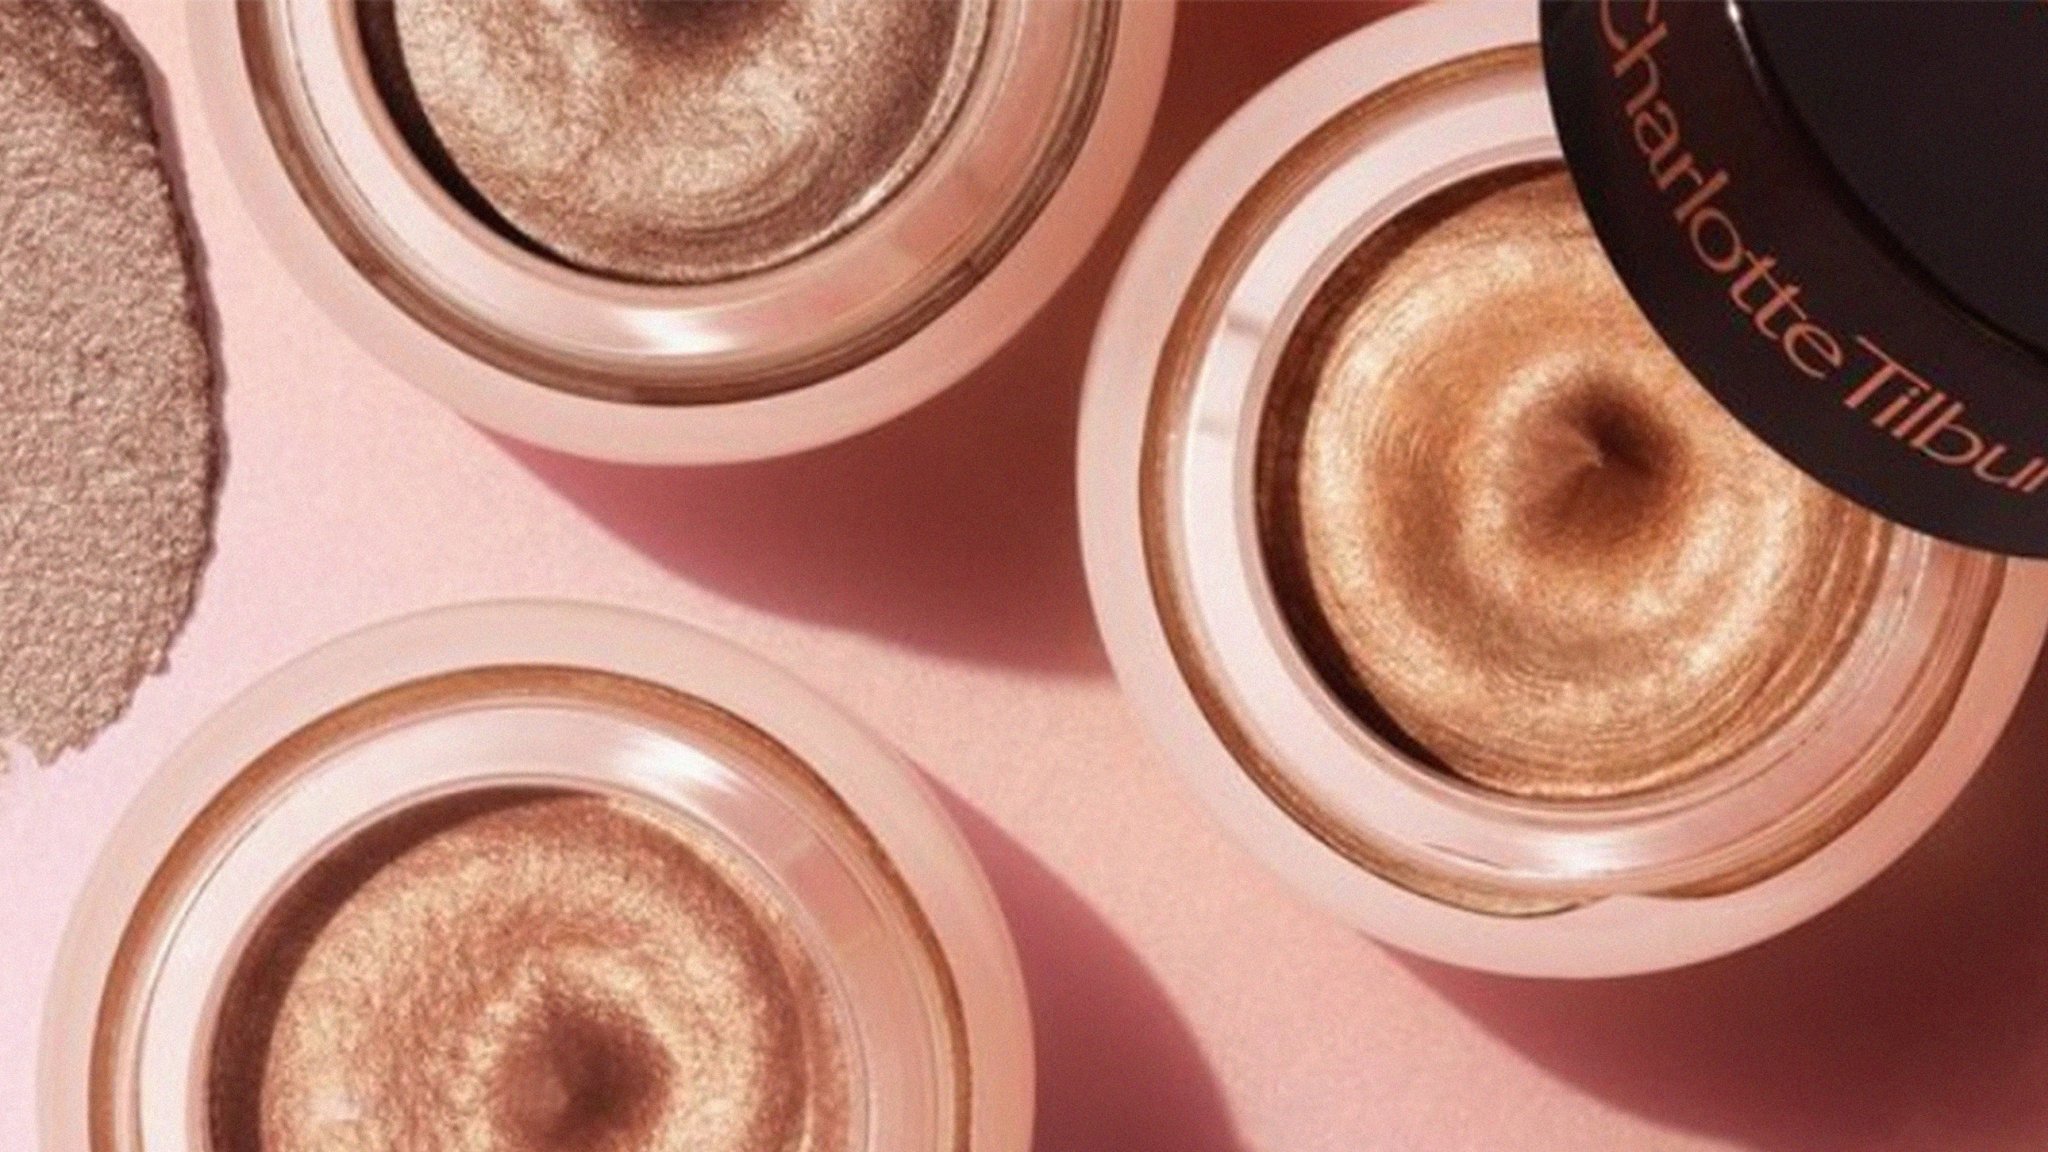 The best Charlotte Tilbury Cyber Monday deals with savings up to 30% and Mystery Boxes